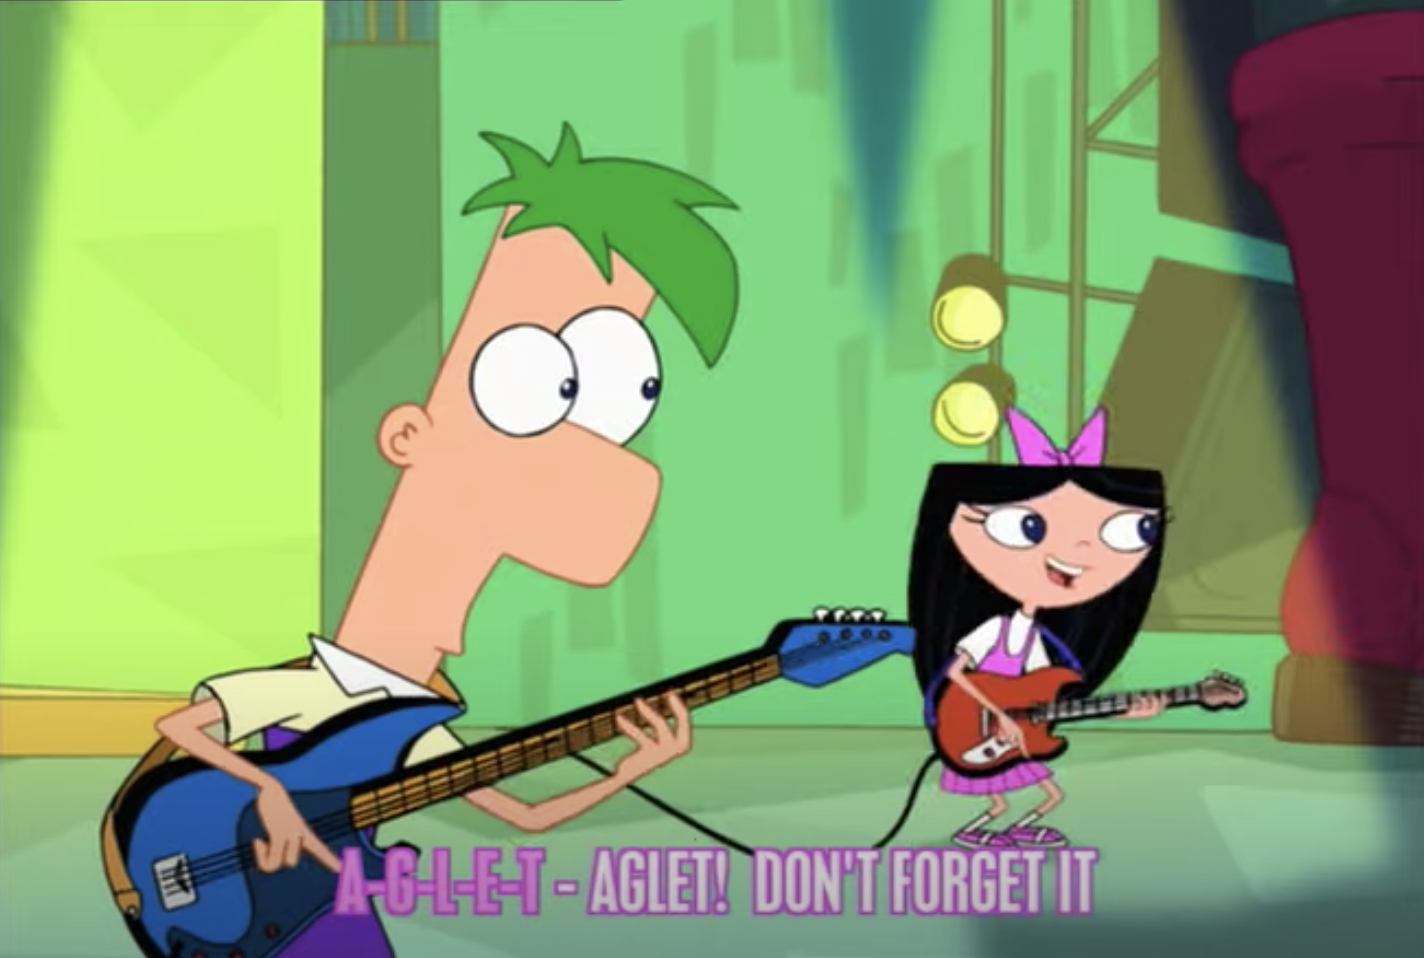 A cartoon band sings &quot;Aglet, don&#x27;t forget it&quot;